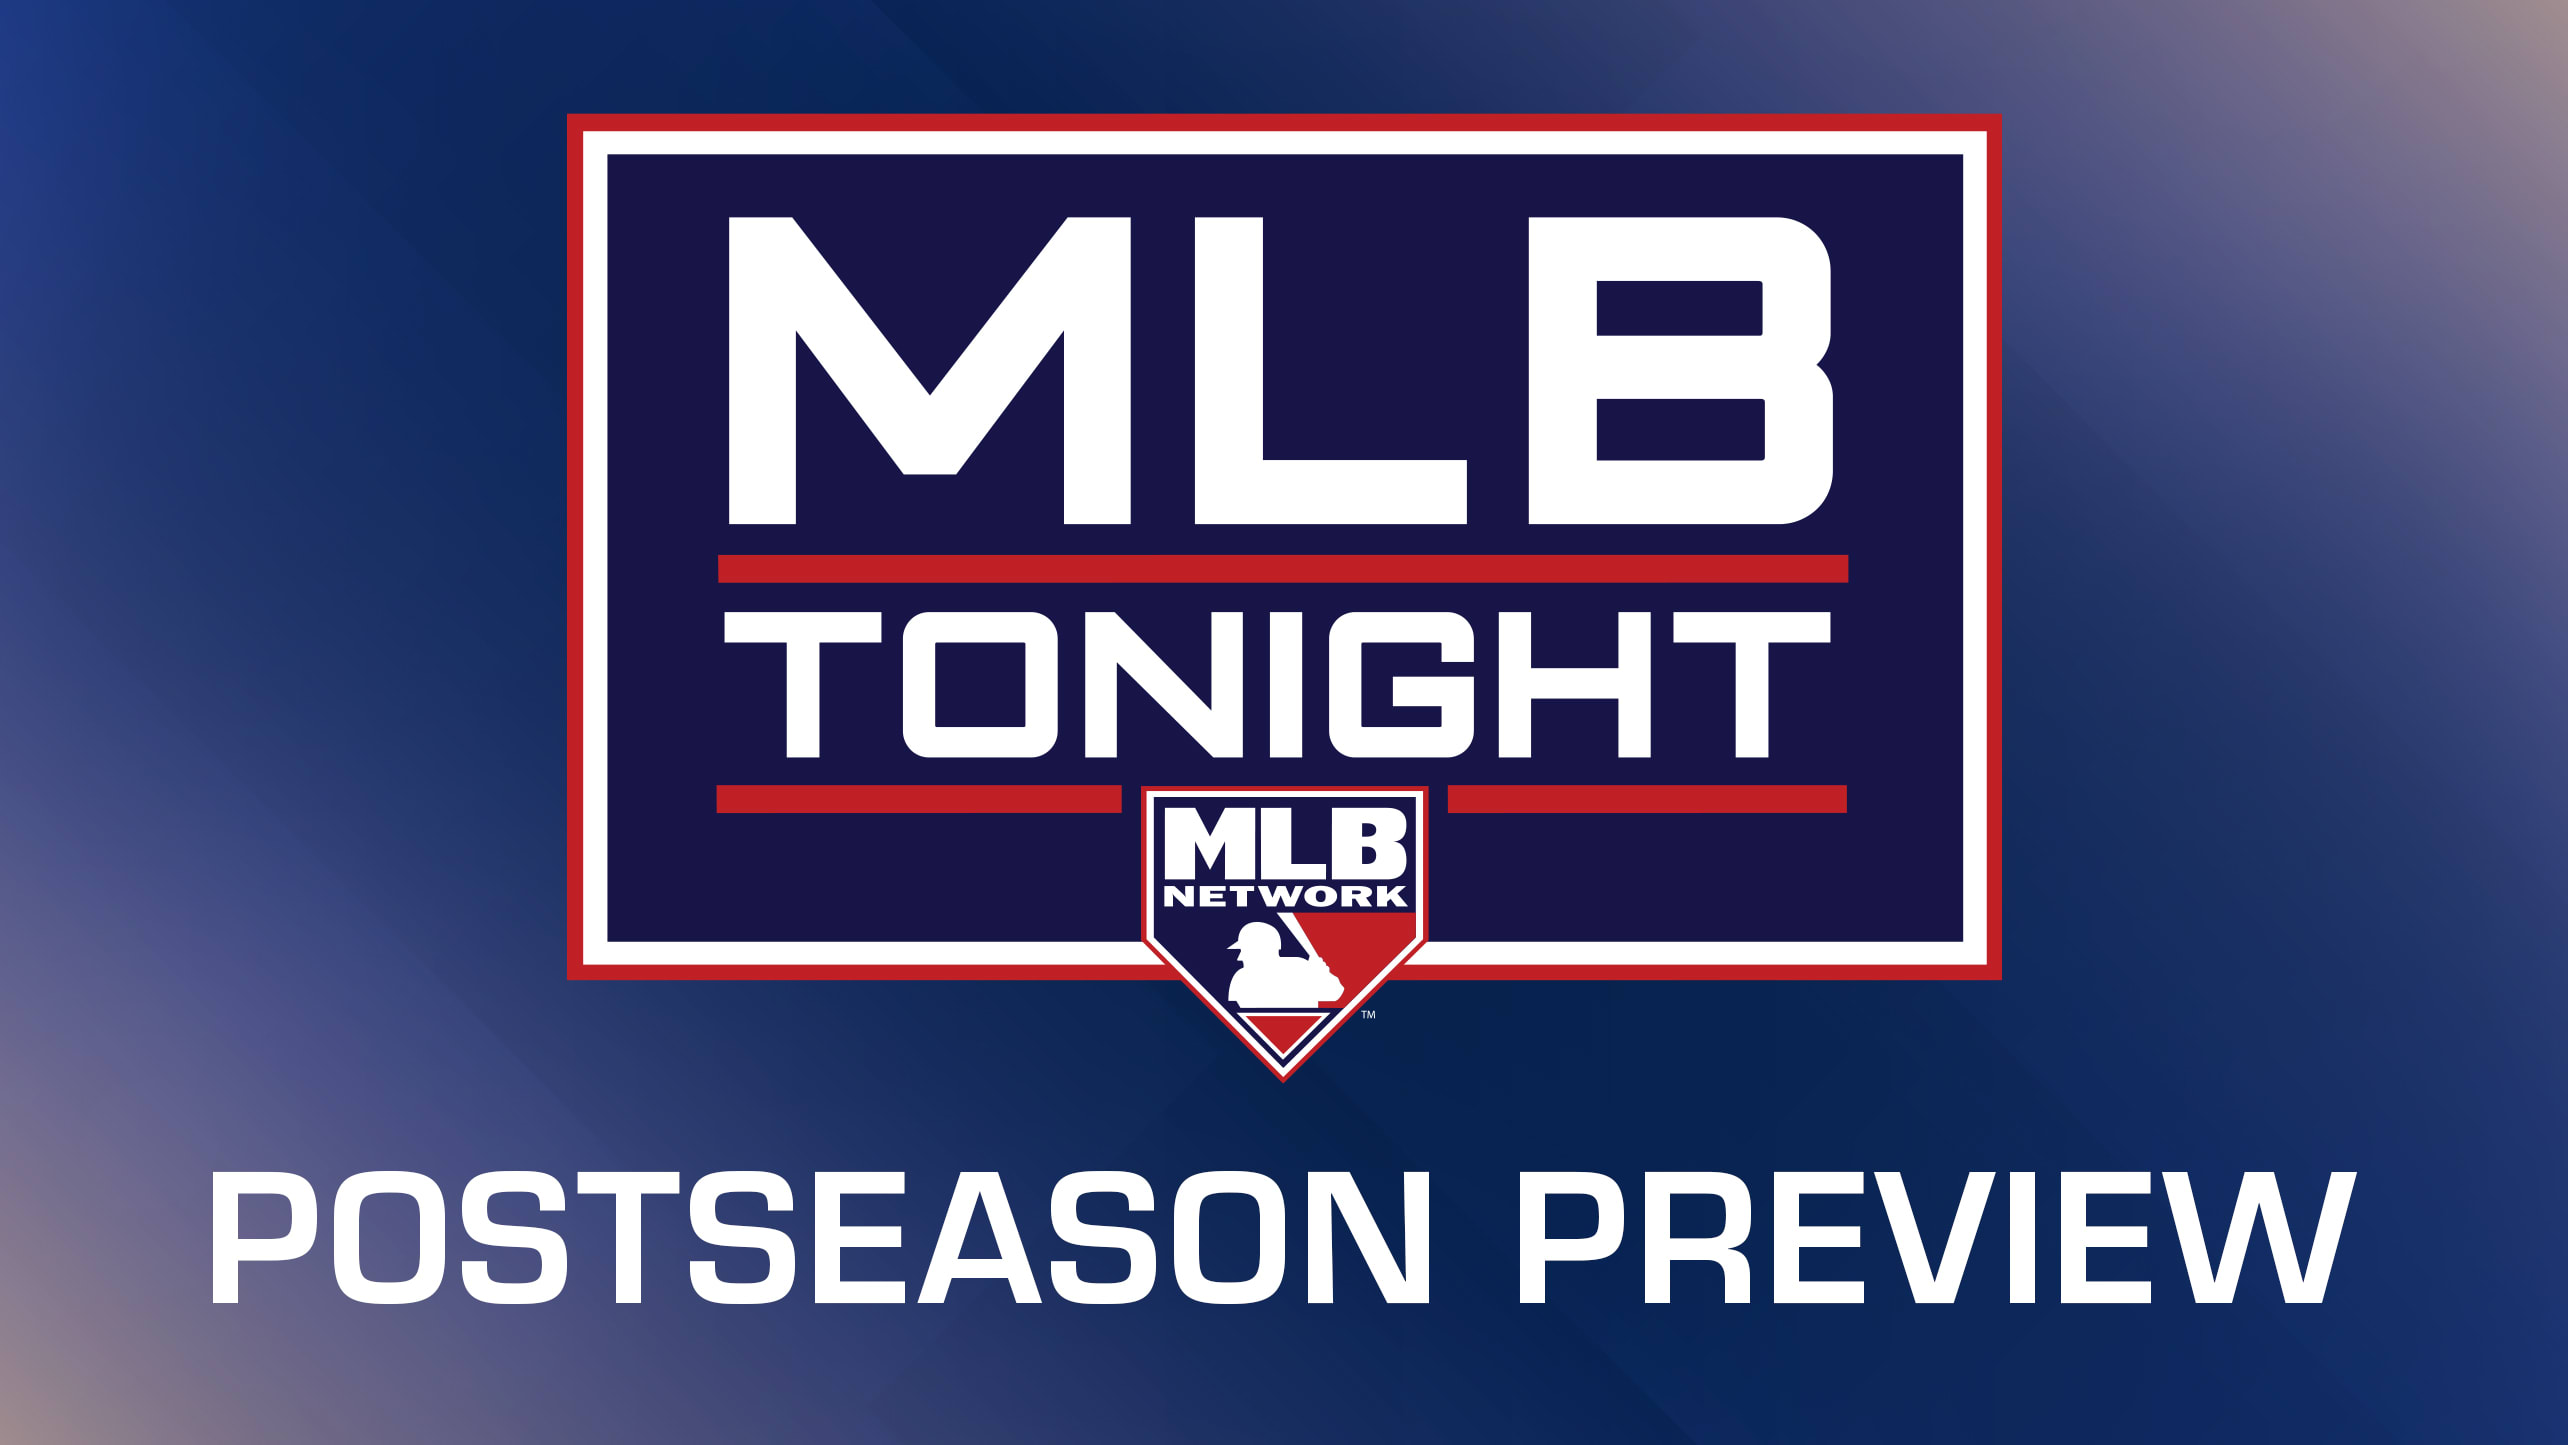 The MLB Tonight logo above the words Postseason Preview